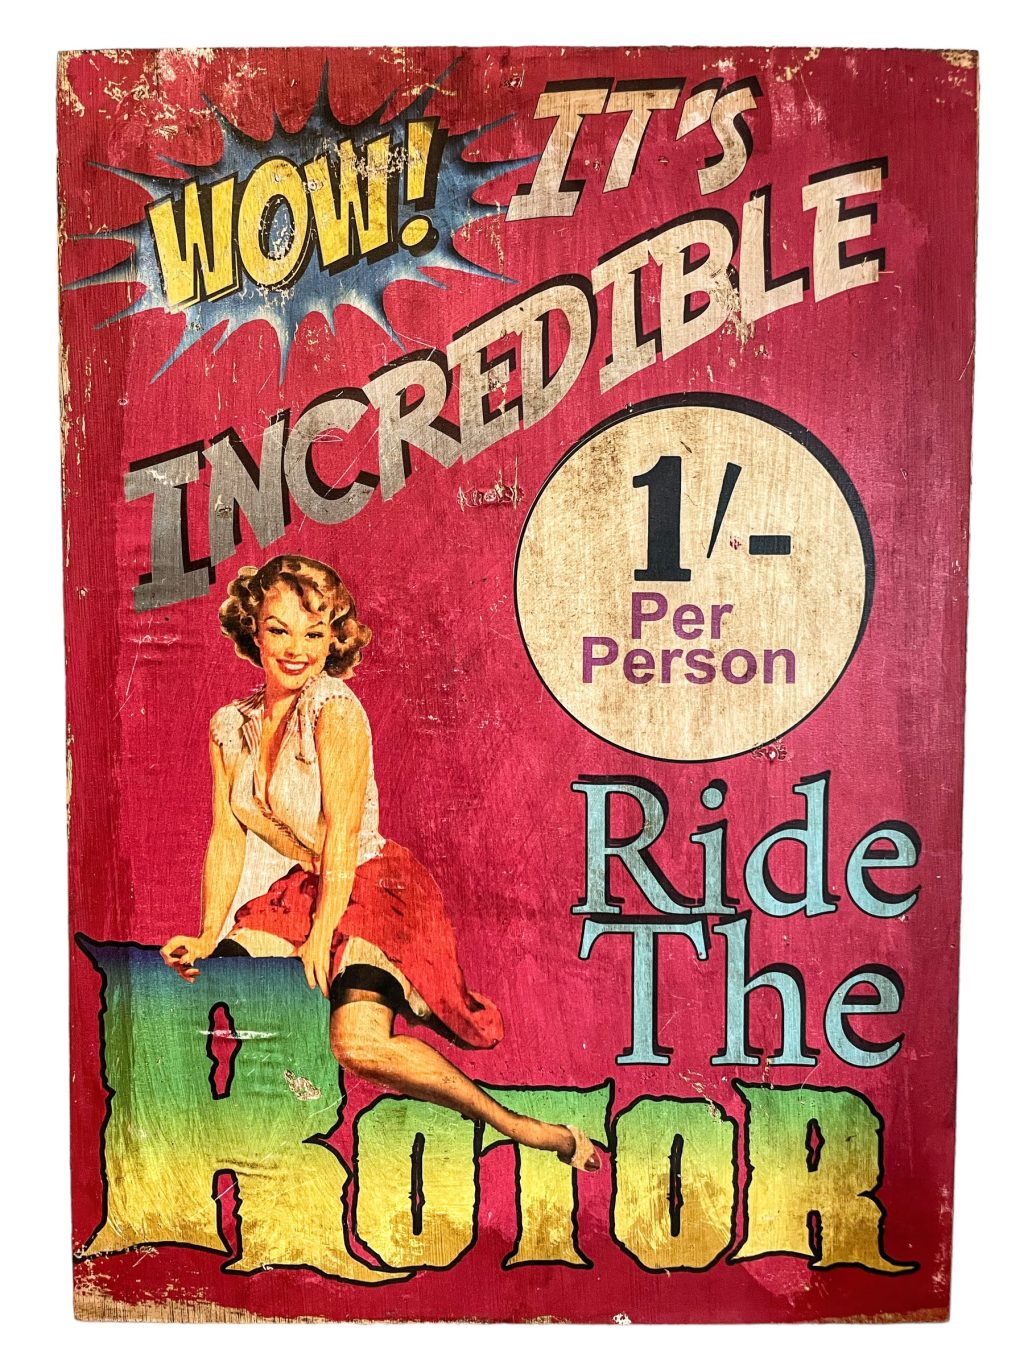 English Ride The Rotor Reproduction Sign Display Fairground Circus Attraction Wall Decor On Wooden Board